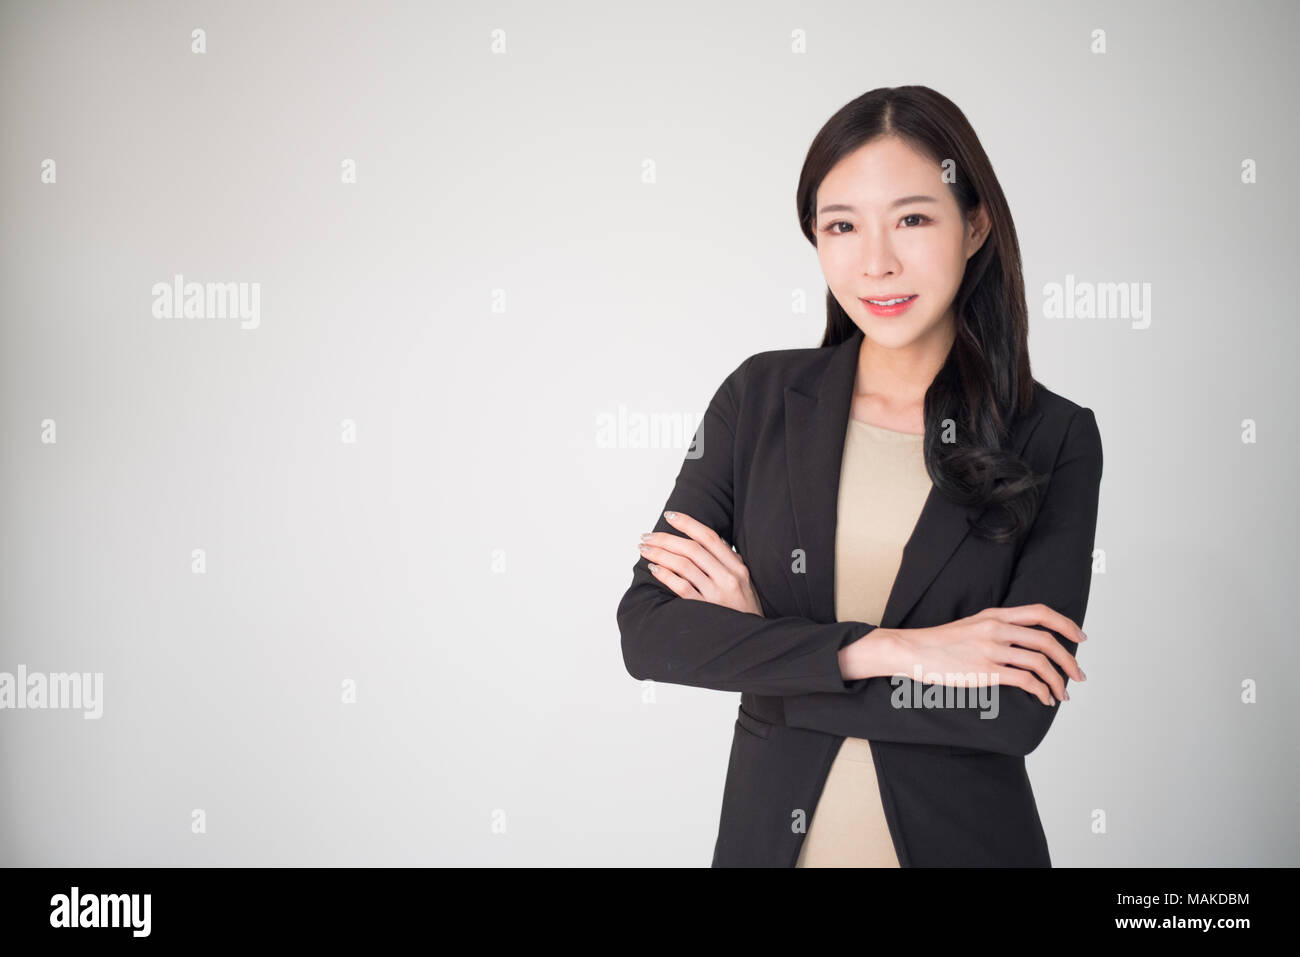 Asian business woman happy smiling isolated on white background. Beautiful, pretty, professional, happy, confident asian business woman concept. Busin Stock Photo